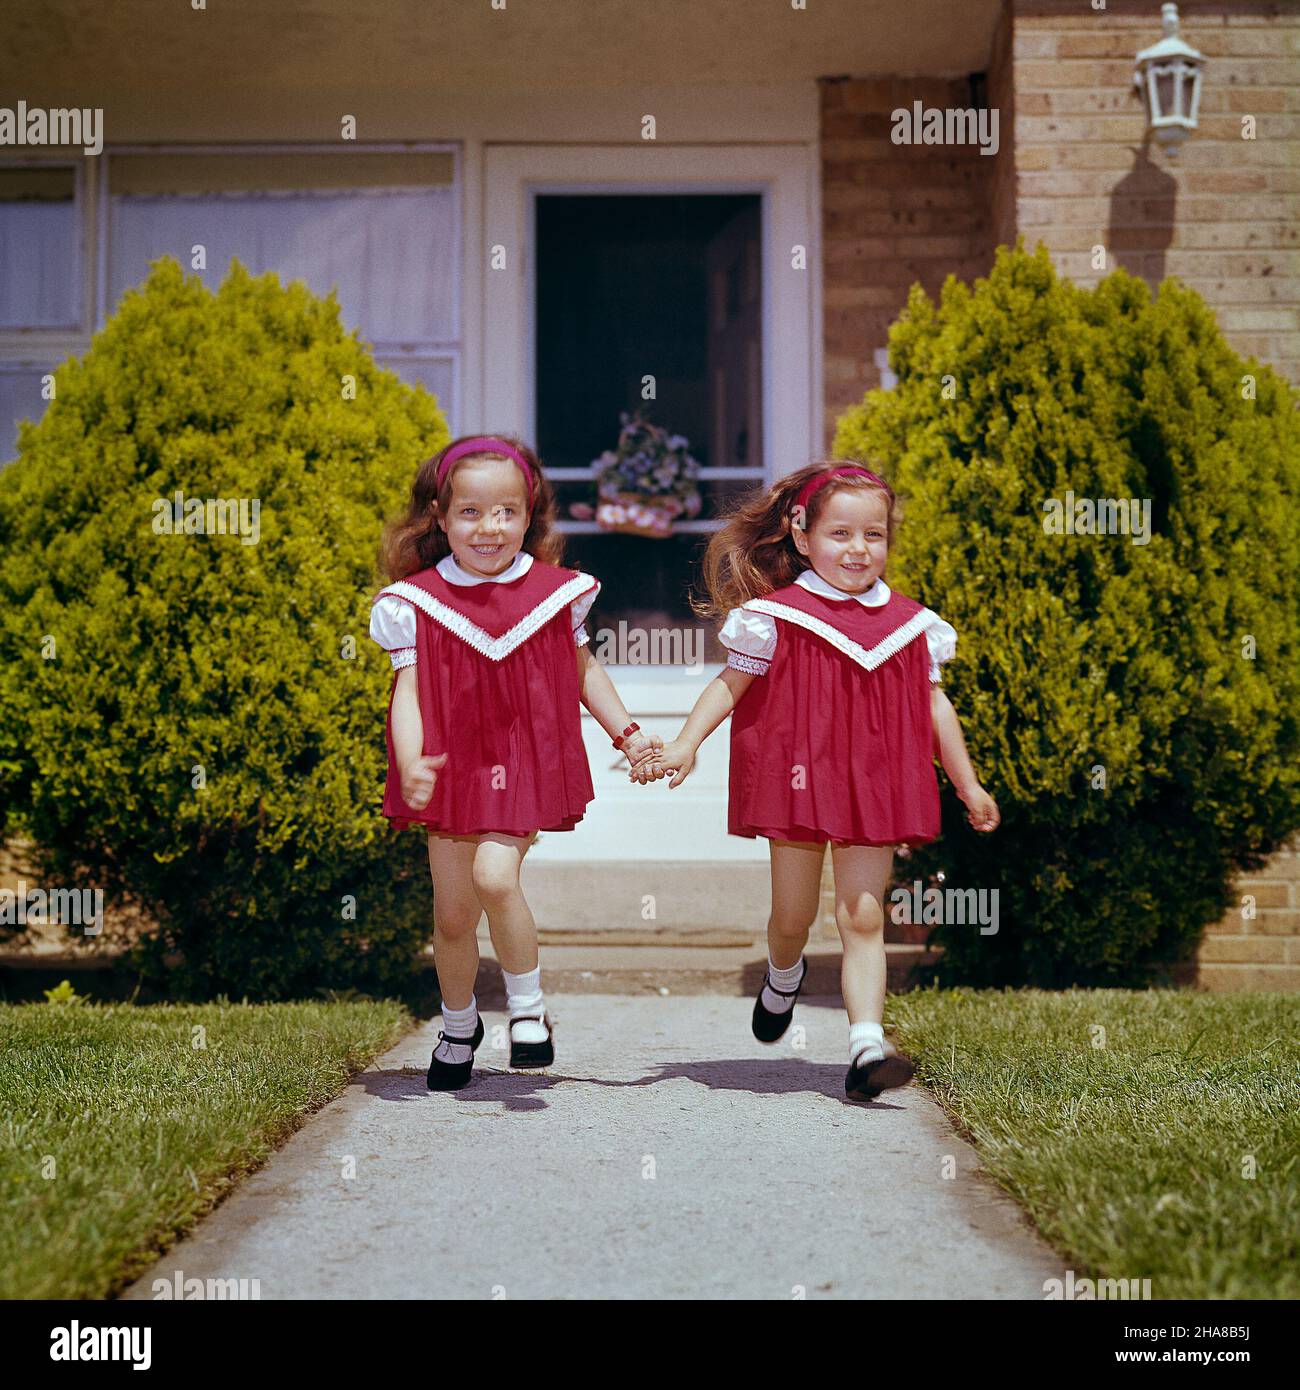 1960s TWIN GIRLS WEARING RED DRESSES MARY JANE SHOES RUNNING DOWN SIDEWALK FROM HOUSE HOLDING HANDS SMILING - kj3689 HAR001 HARS DOUBLE PLEASED JOY FEMALES MATCH CARING SIBLINGS SISTERS EXPRESSIONS DRESSES MATCHING SAME CHEERFUL MARY JANE HOLDING HANDS SIBLING SMILES JOYFUL LOOK-ALIKE PERSONAL ATTACHMENT AFFECTION DUPLICATE EMOTION JUVENILES LOOK ALIKE CAUCASIAN ETHNICITY CLONE HAR001 OLD FASHIONED Stock Photo